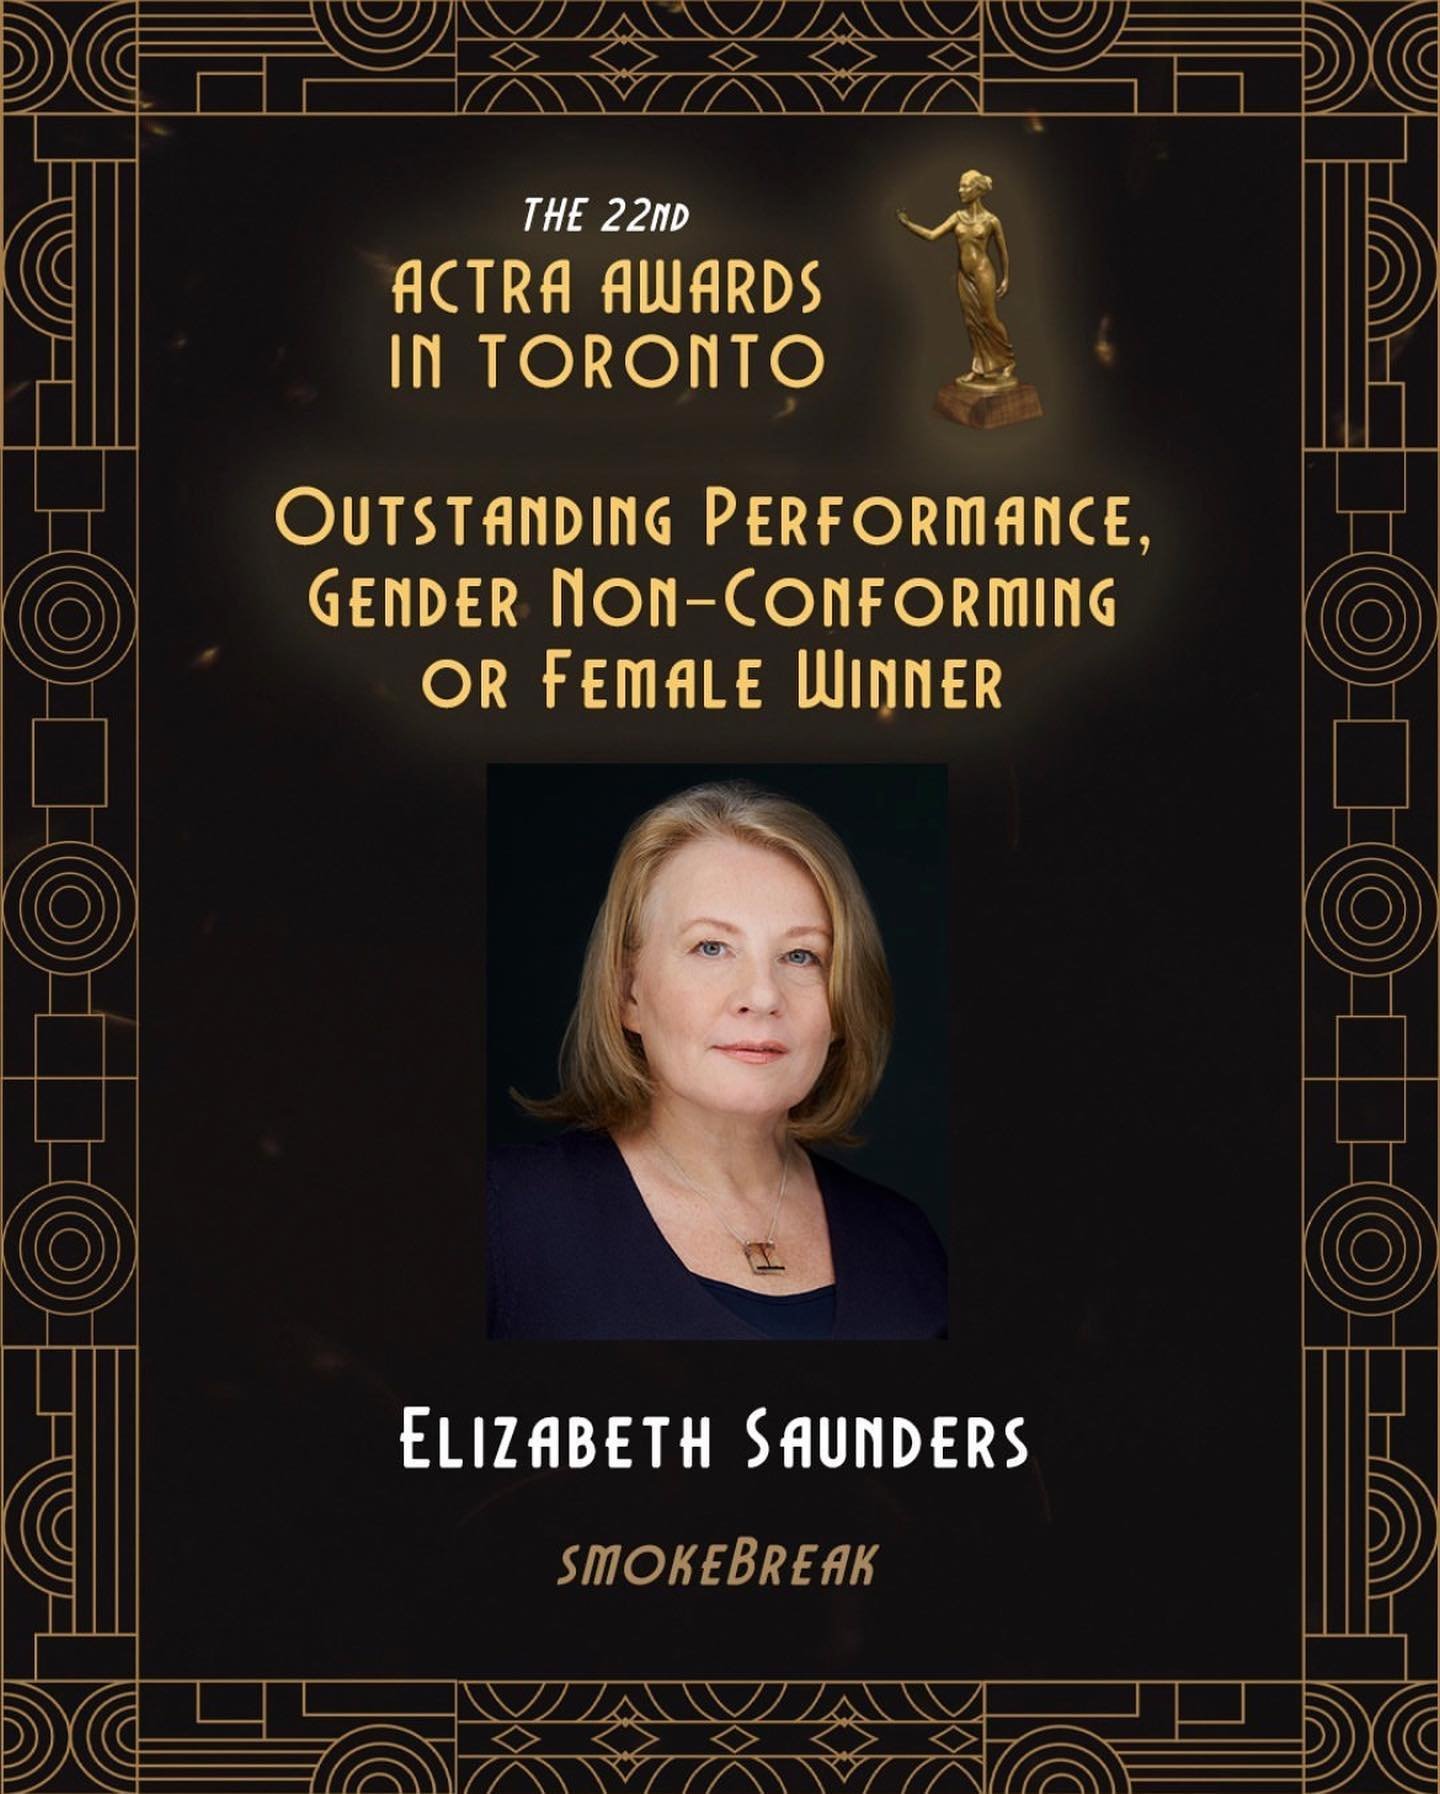 Congratulations to @thislizsaunders for her #ACTRA Award for Outstanding Performance - Gender Non-Conforming or Female  at this year&rsquo;s #ACTRAawards! 

Additional nominees include, @StaceyDepass, @DanChameroy and @DanielKeithMorrison!

#WeAreThe